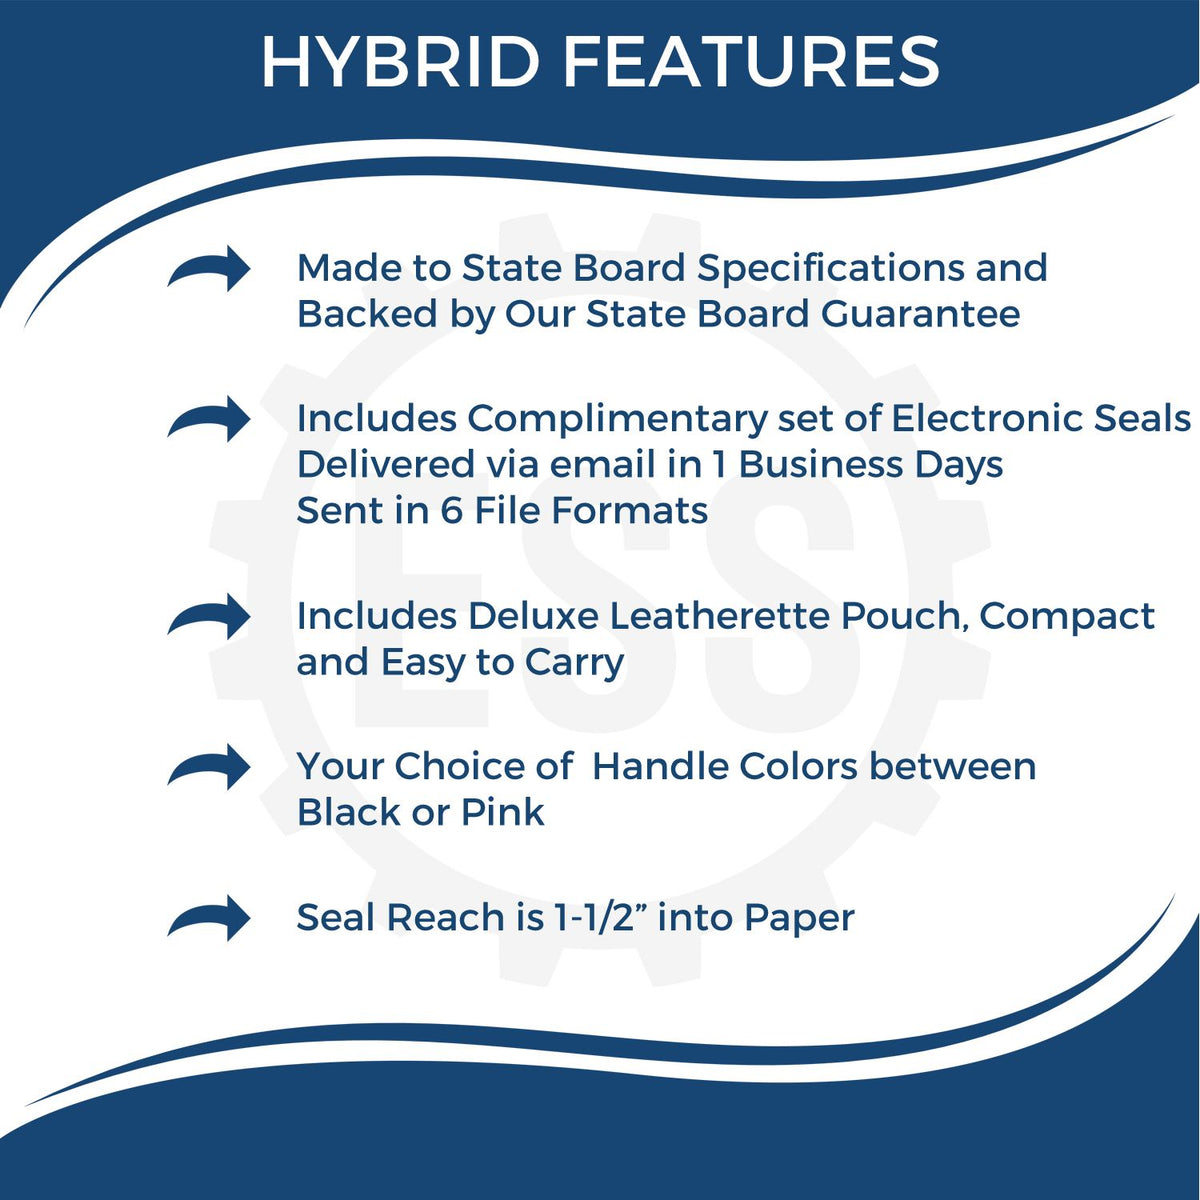 A picture of an infographic highlighting the selling points for the Hybrid Texas Engineer Seal